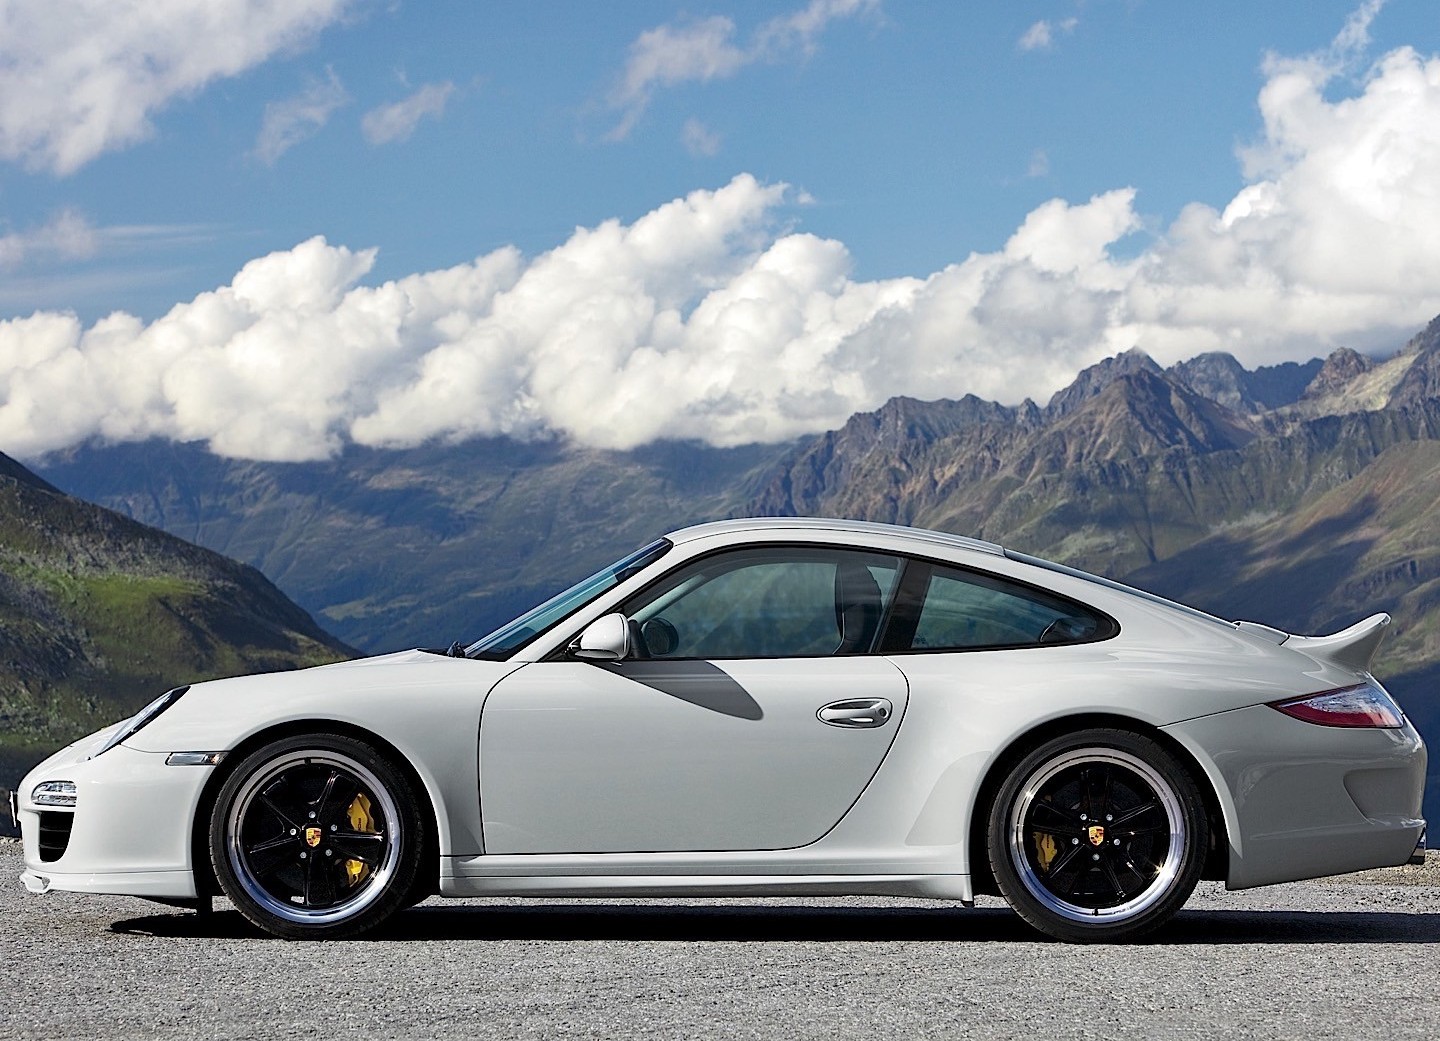 Porsche 911 special editions planned, inspired by RS 2.7, 911 ST – report